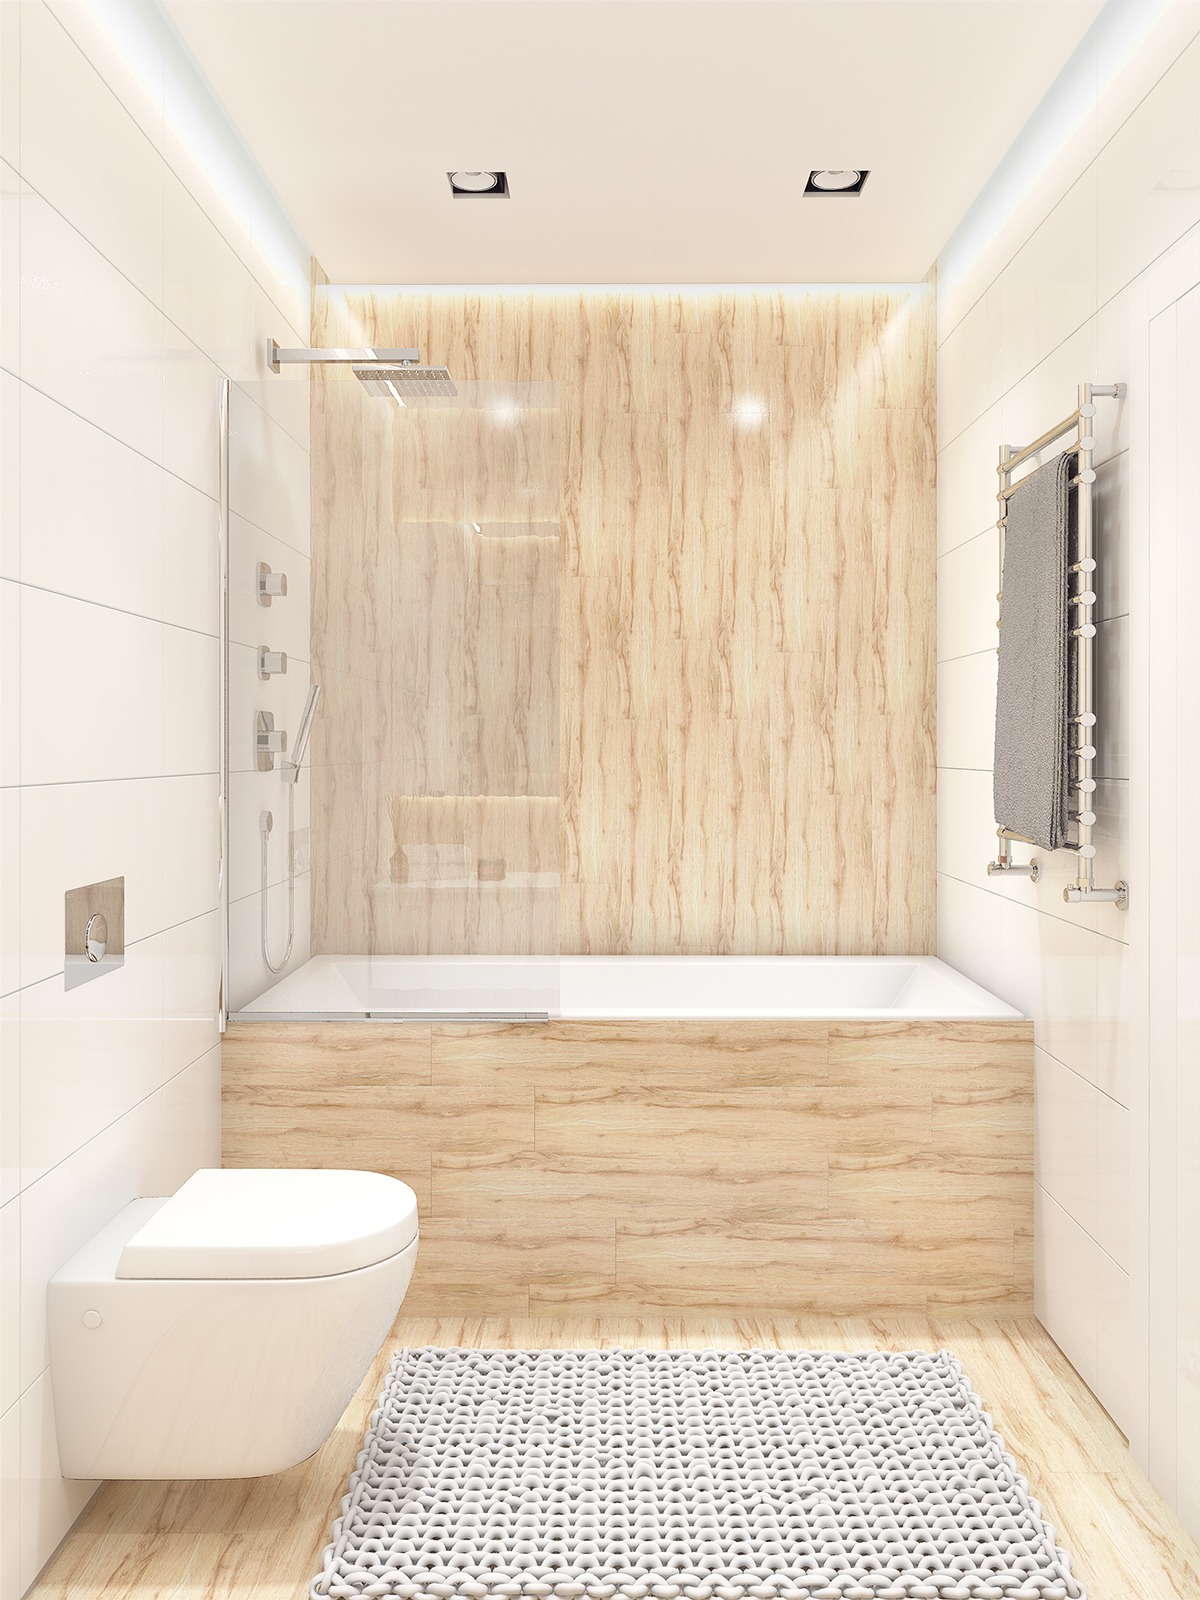 Decorating the bathroom design "width =" 1200 "height =" 1600 "srcset =" https://mileray.com/wp-content/uploads/2020/05/1588516330_415_Applying-Modern-Bathroom-Decor-With-Creative-and-Perfect-Decorating-Which.jpg 1200w, https://mileray.com/ wp-content / uploads / 2016/09 / Juliya-Butova-225x300.jpg 225w, https://mileray.com/wp-content/uploads/2016/09/Juliya-Butova-768x1024.jpg 768w, https: // mileray.com/wp-content/uploads/2016/09/Juliya-Butova-696x928.jpg 696w, https://mileray.com/wp-content/uploads/2016/09/Juliya-Butova-1068x1424.jpg 1068w, https://mileray.com/wp-content/uploads/2016/09/Juliya-Butova-315x420.jpg 315w "Sizes =" (maximum width: 1200px) 100vw, 1200px